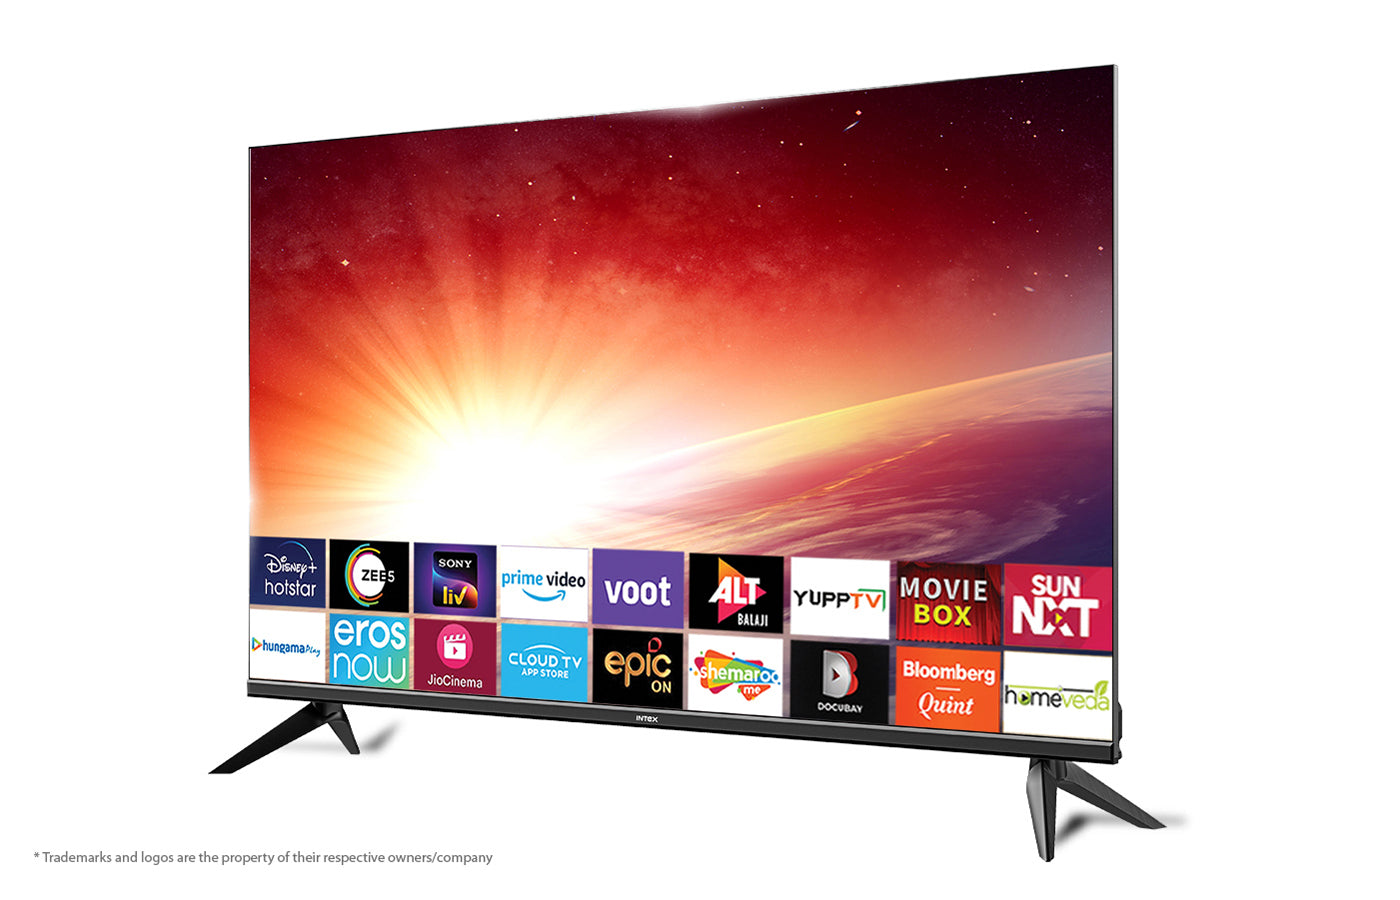 LED Android TV 4K UHD 43PUS8007/12